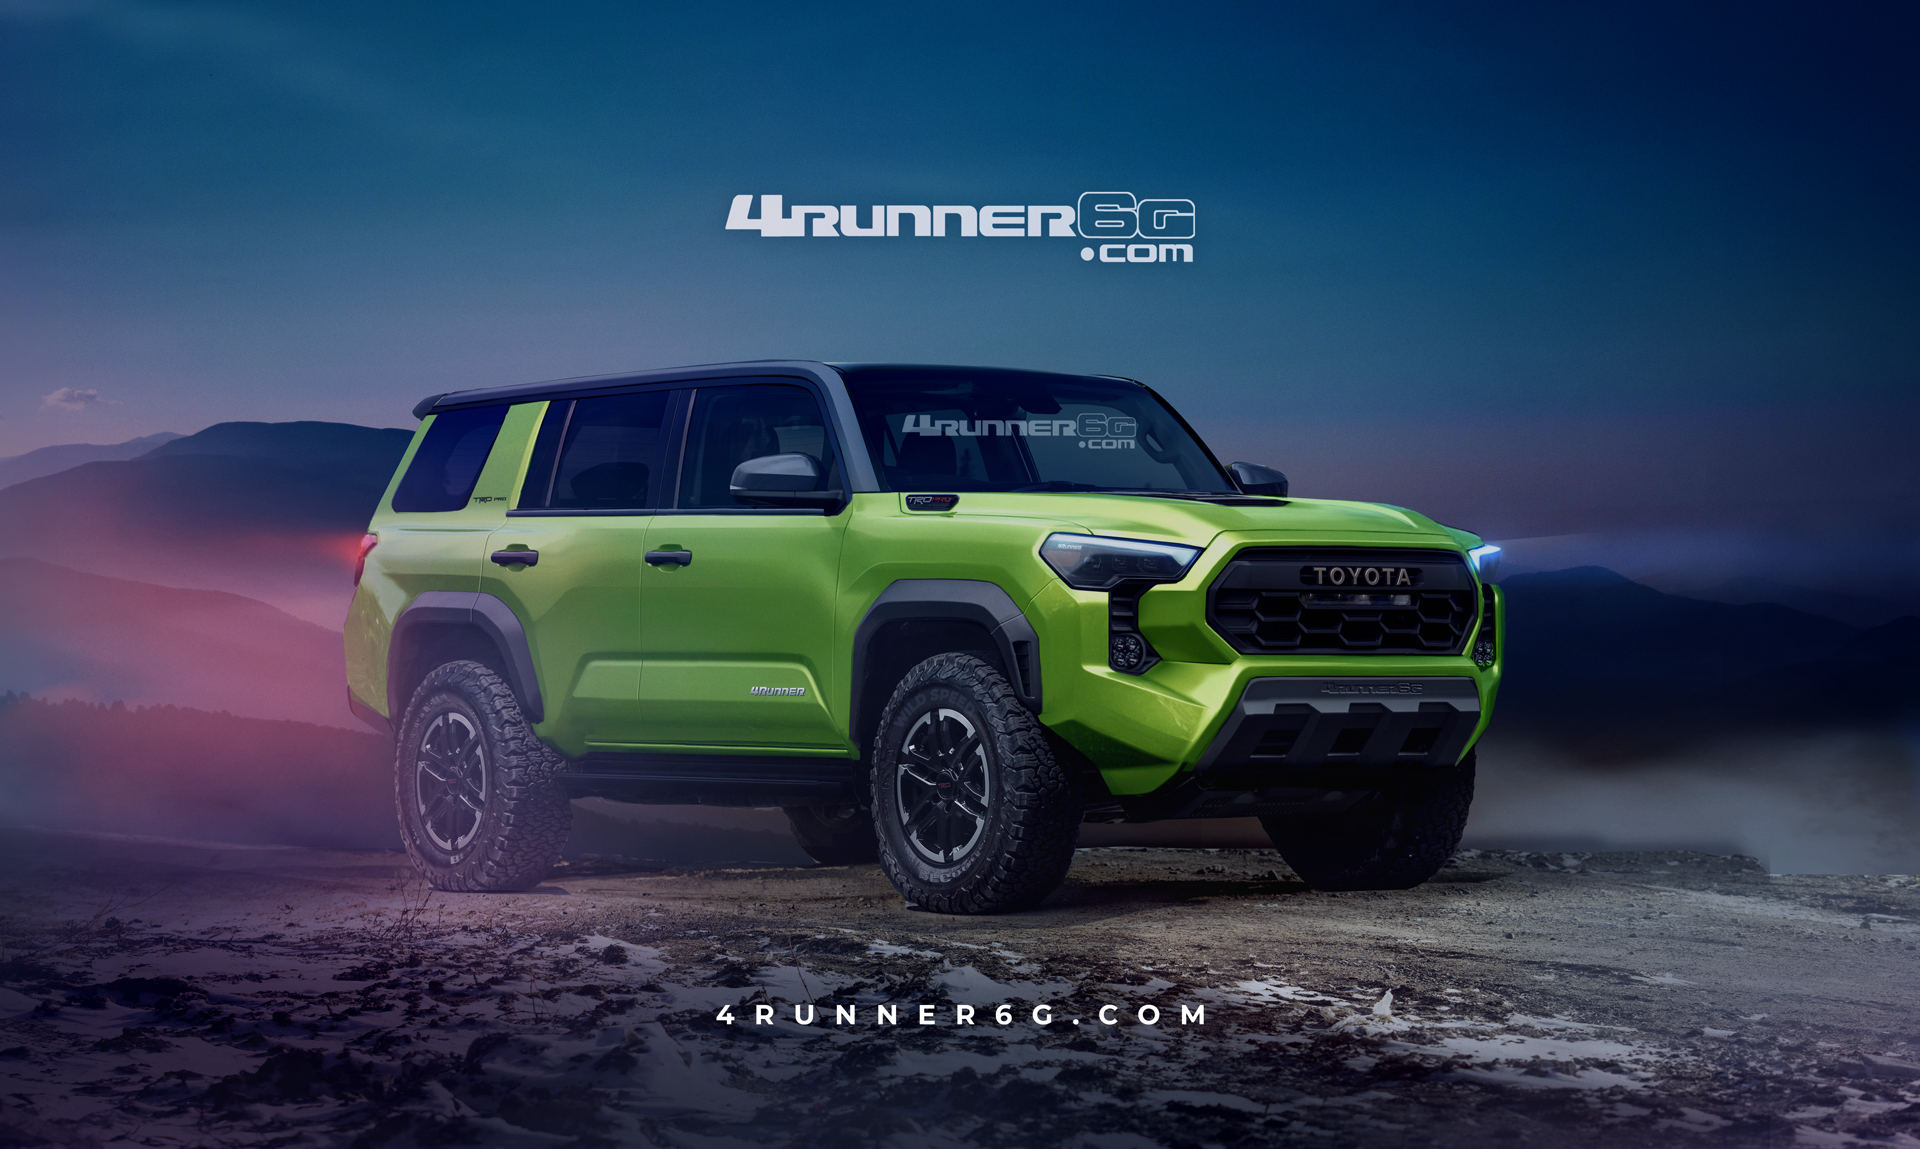 2025 Toyota 4runner 2025 4Runner (6th Gen) News, Specs, Engines, Release Date, Production Date & Preview Renderings -- Insider Info (as of 7/30/23) 2025 Toyota-4Runner-Front-TRD-ElectricLime